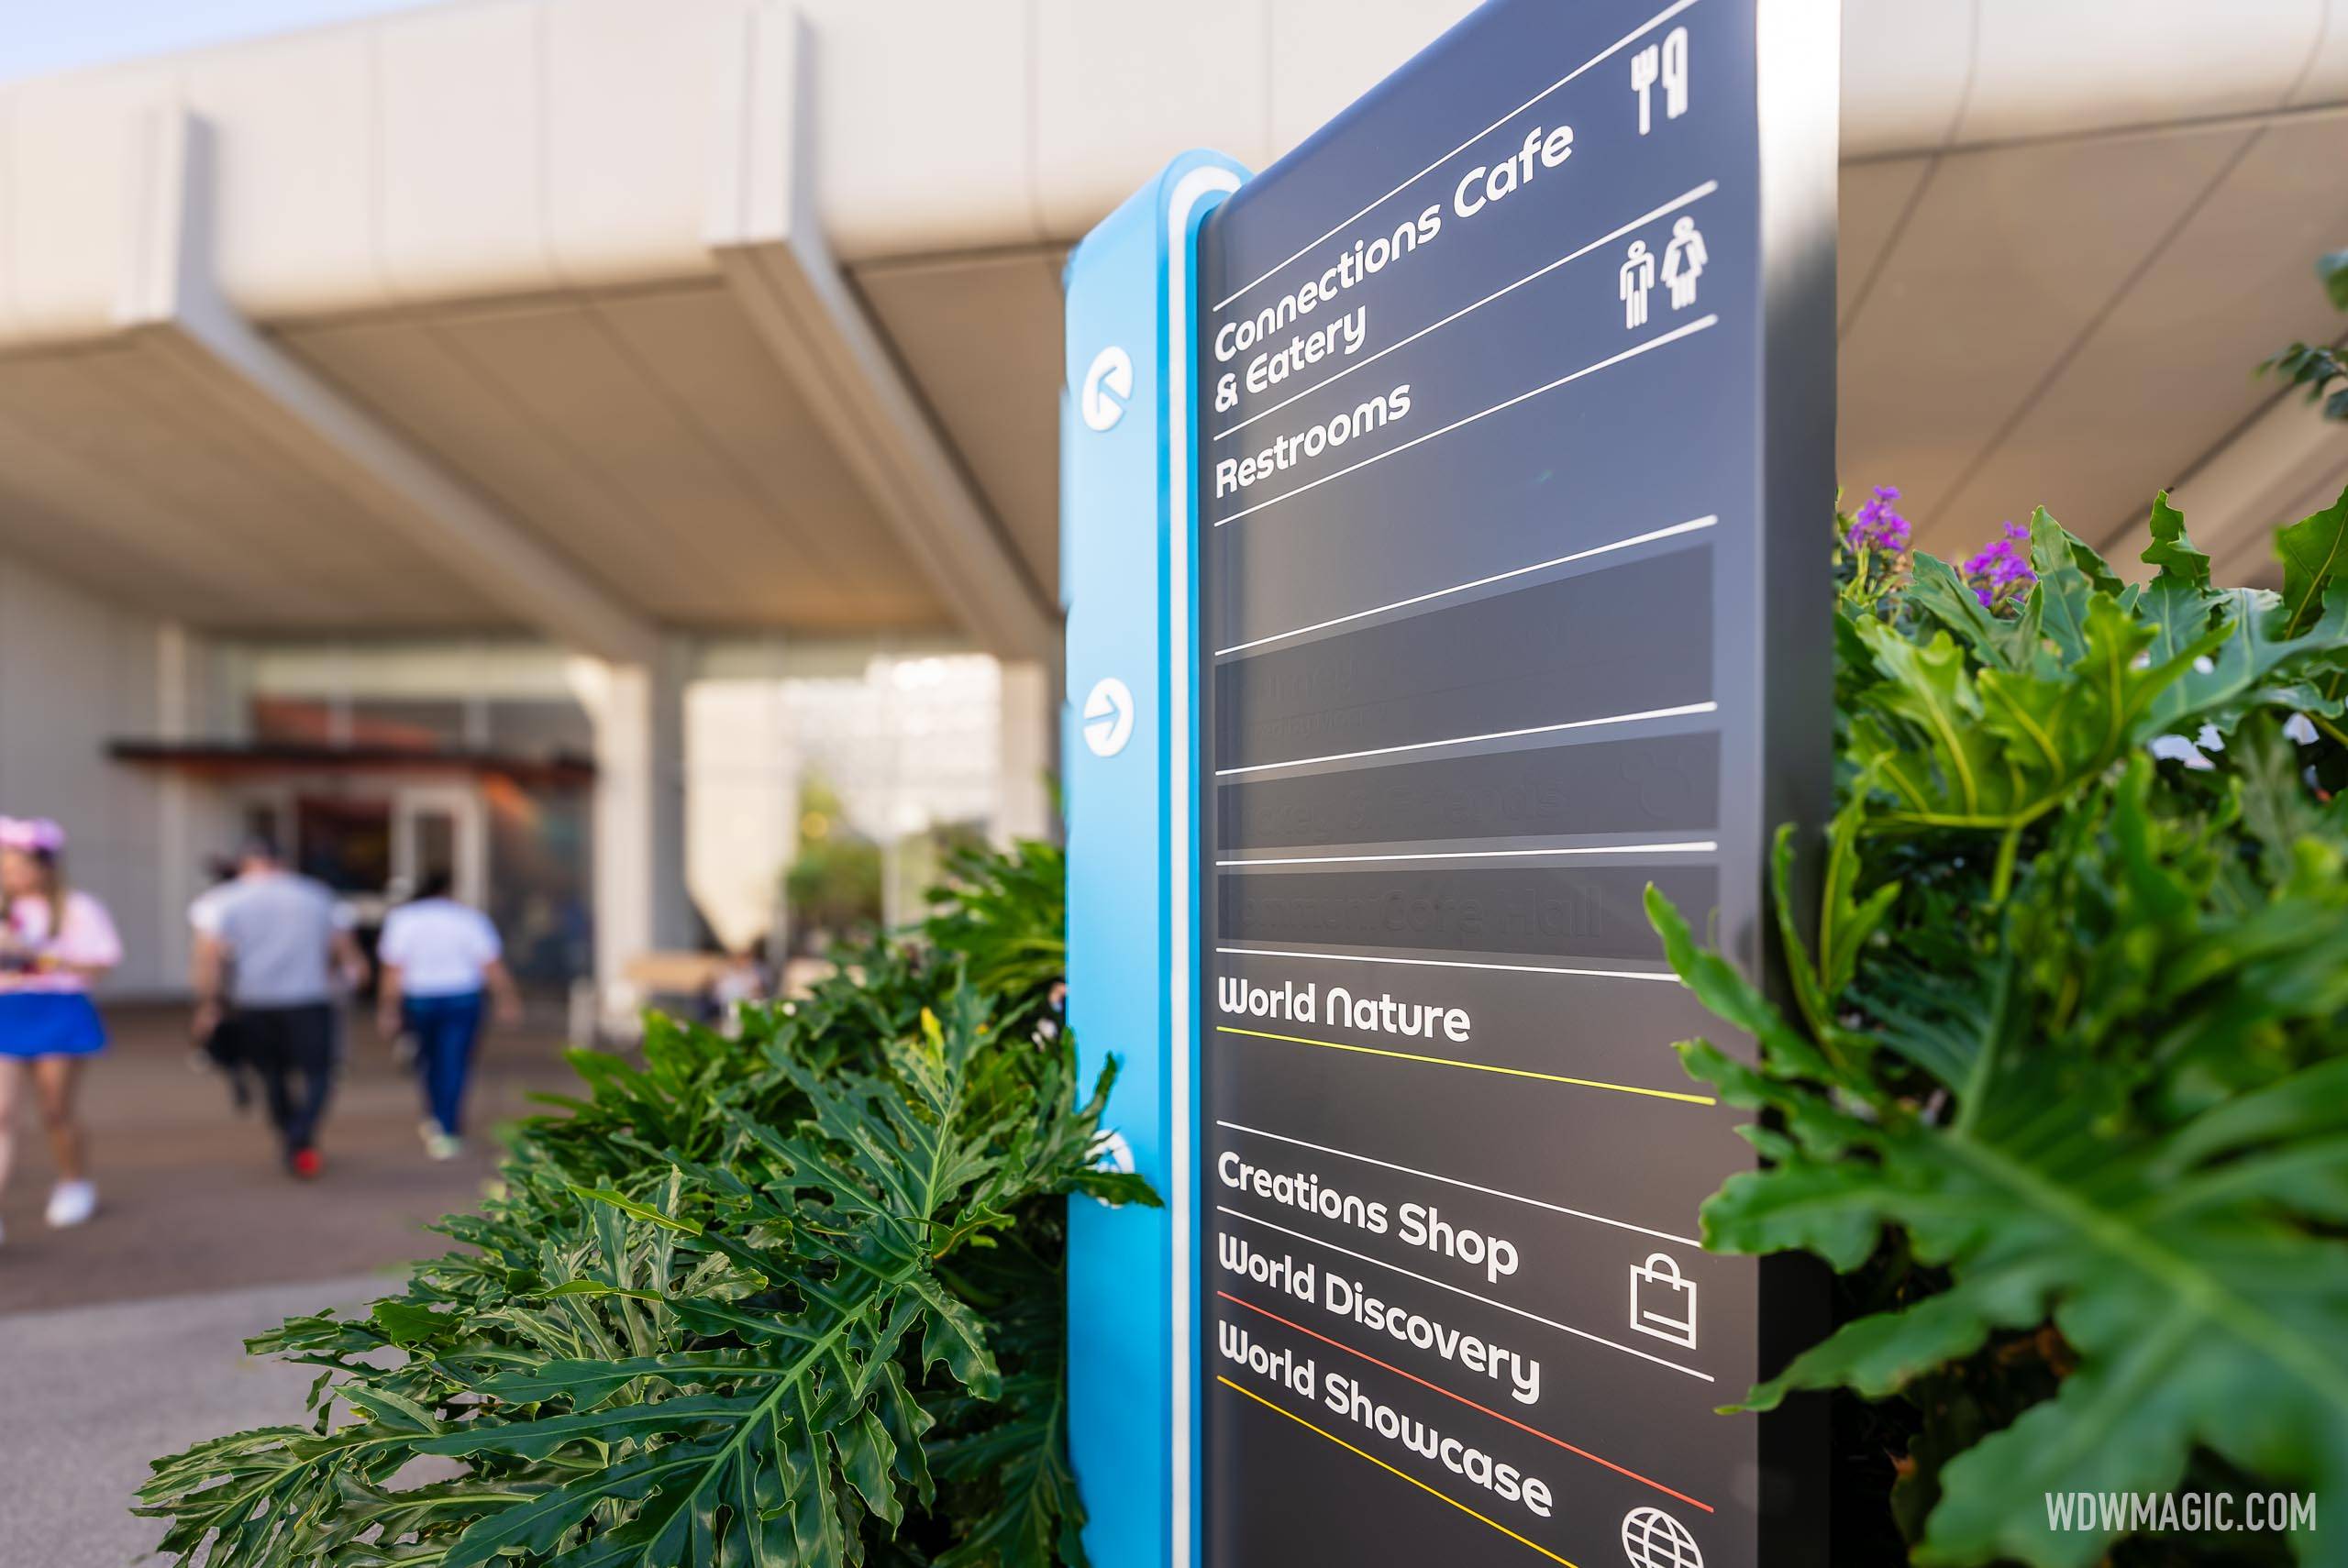 New EPCOT directional signage includes CommuniCore Hall and Mickey Mouse meet-and-greet